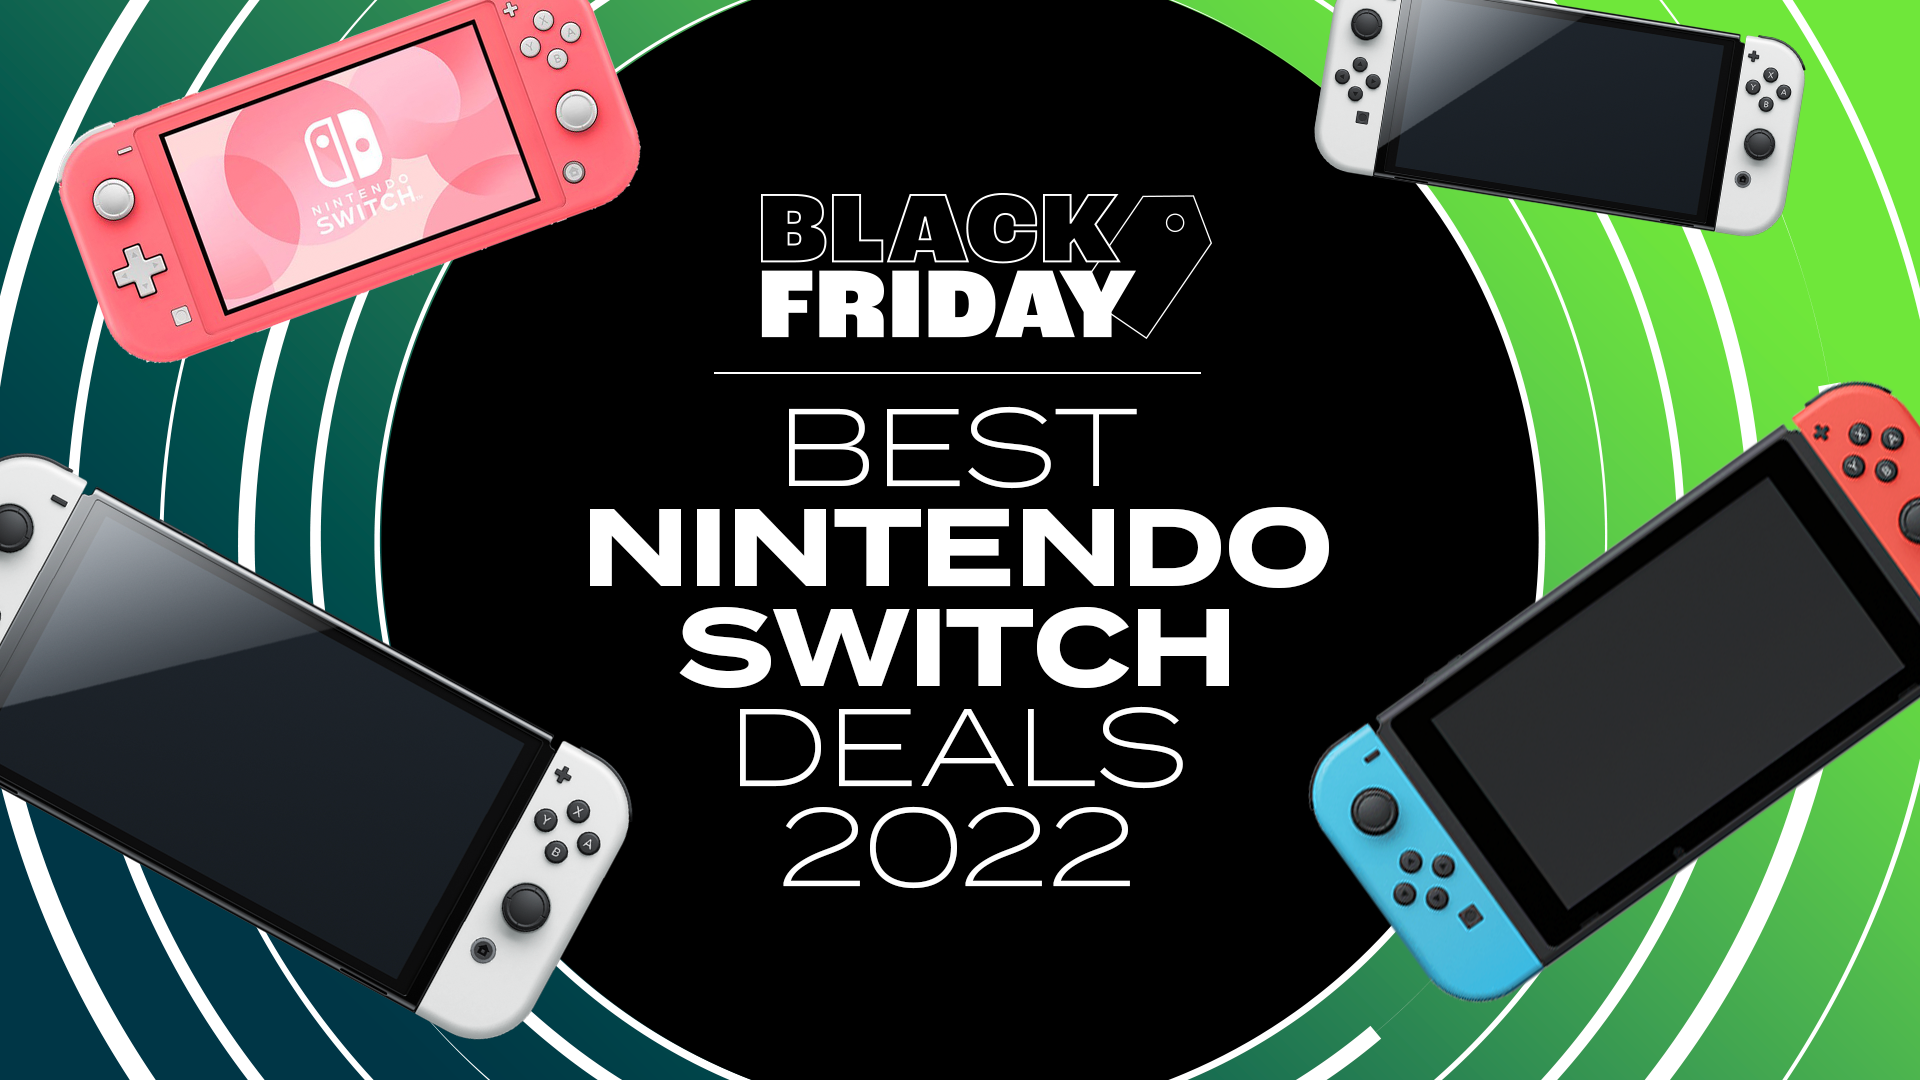 Image for Cyber Monday Nintendo Switch deals 2022: best offers and discounts